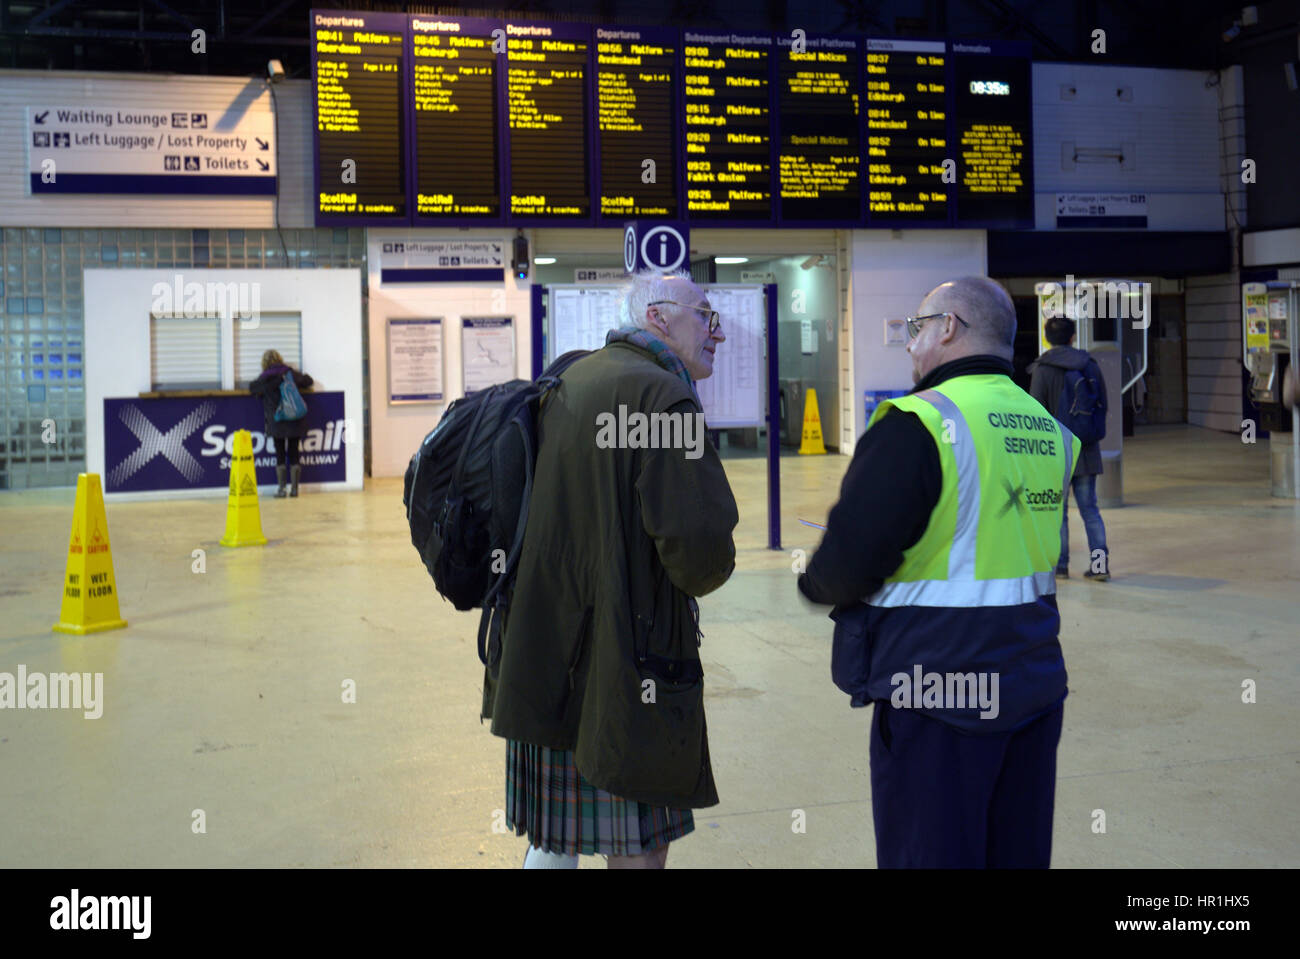 Queen Street station Glasgow tourists waiting for trains kilted customer with service staff Stock Photo